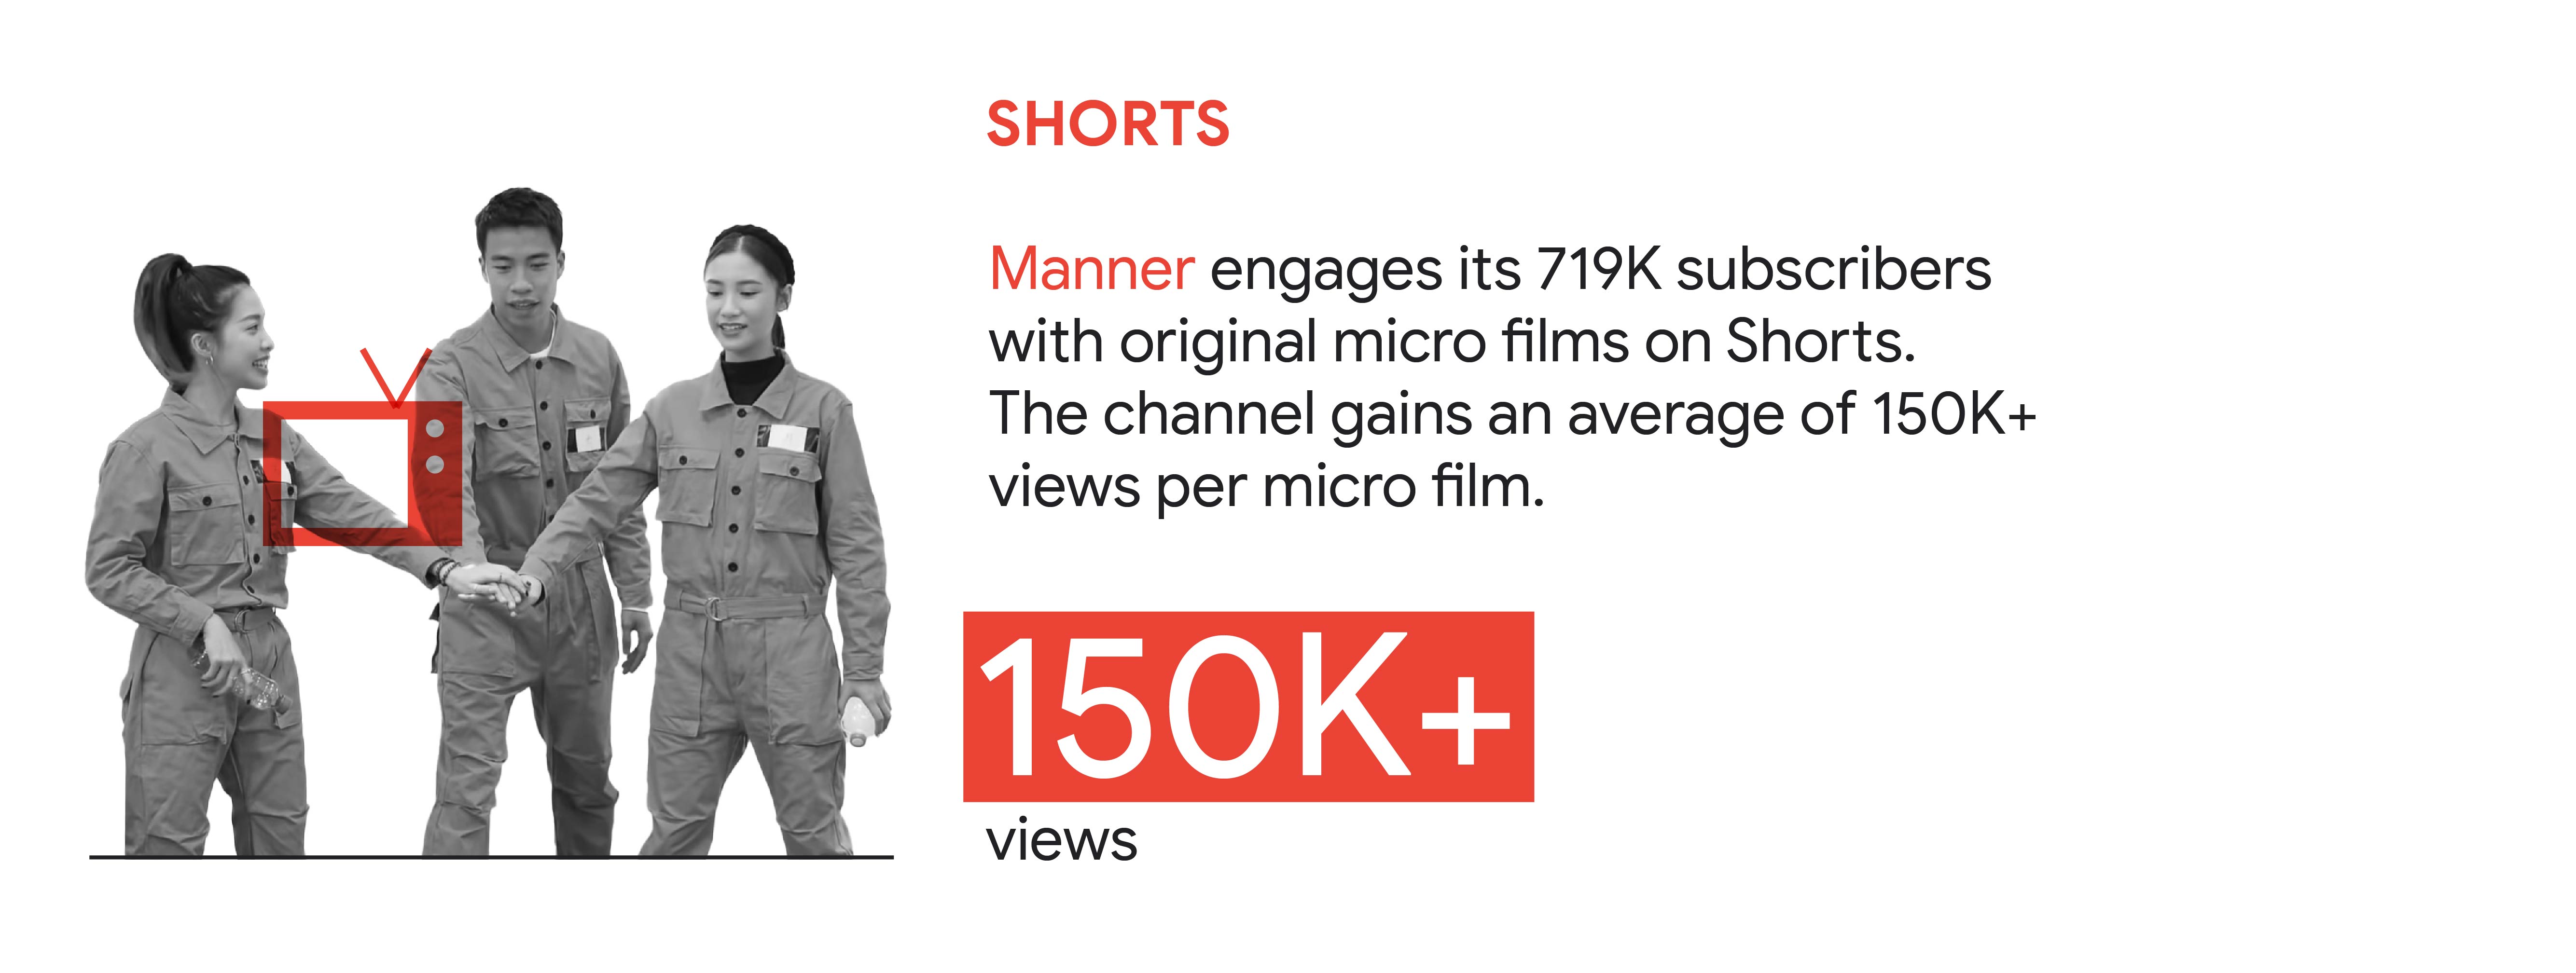 YouTube trend 5: Shorts. In Hong Kong, Manner engages its 719K subscribers with original micro films on Shorts. The channel gains an average of 150K+ views per micro film.